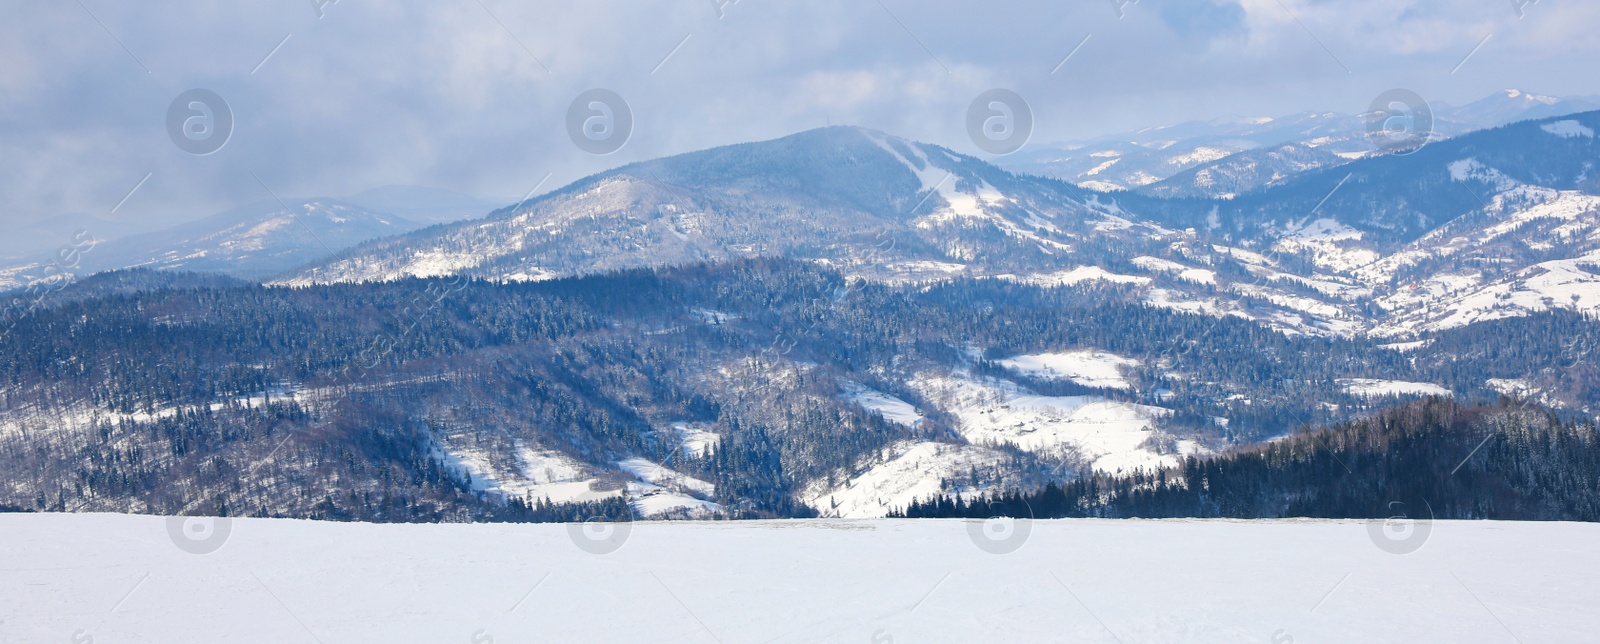 Image of Picturesque view of snowy hills at mountain resort. Banner design